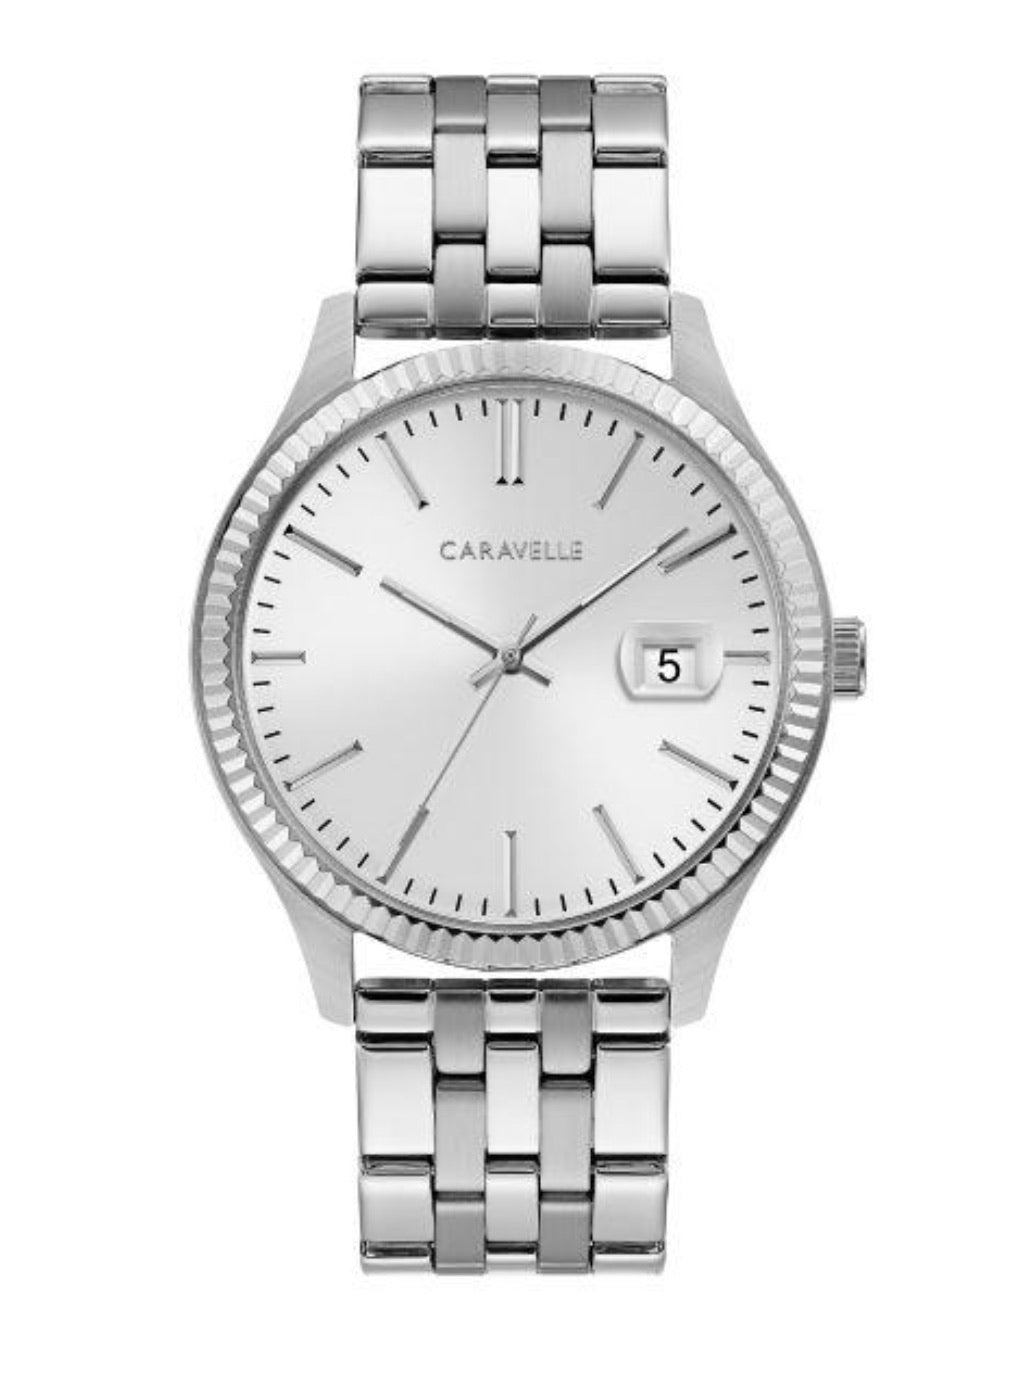 Men’s All White Caravelle Watch